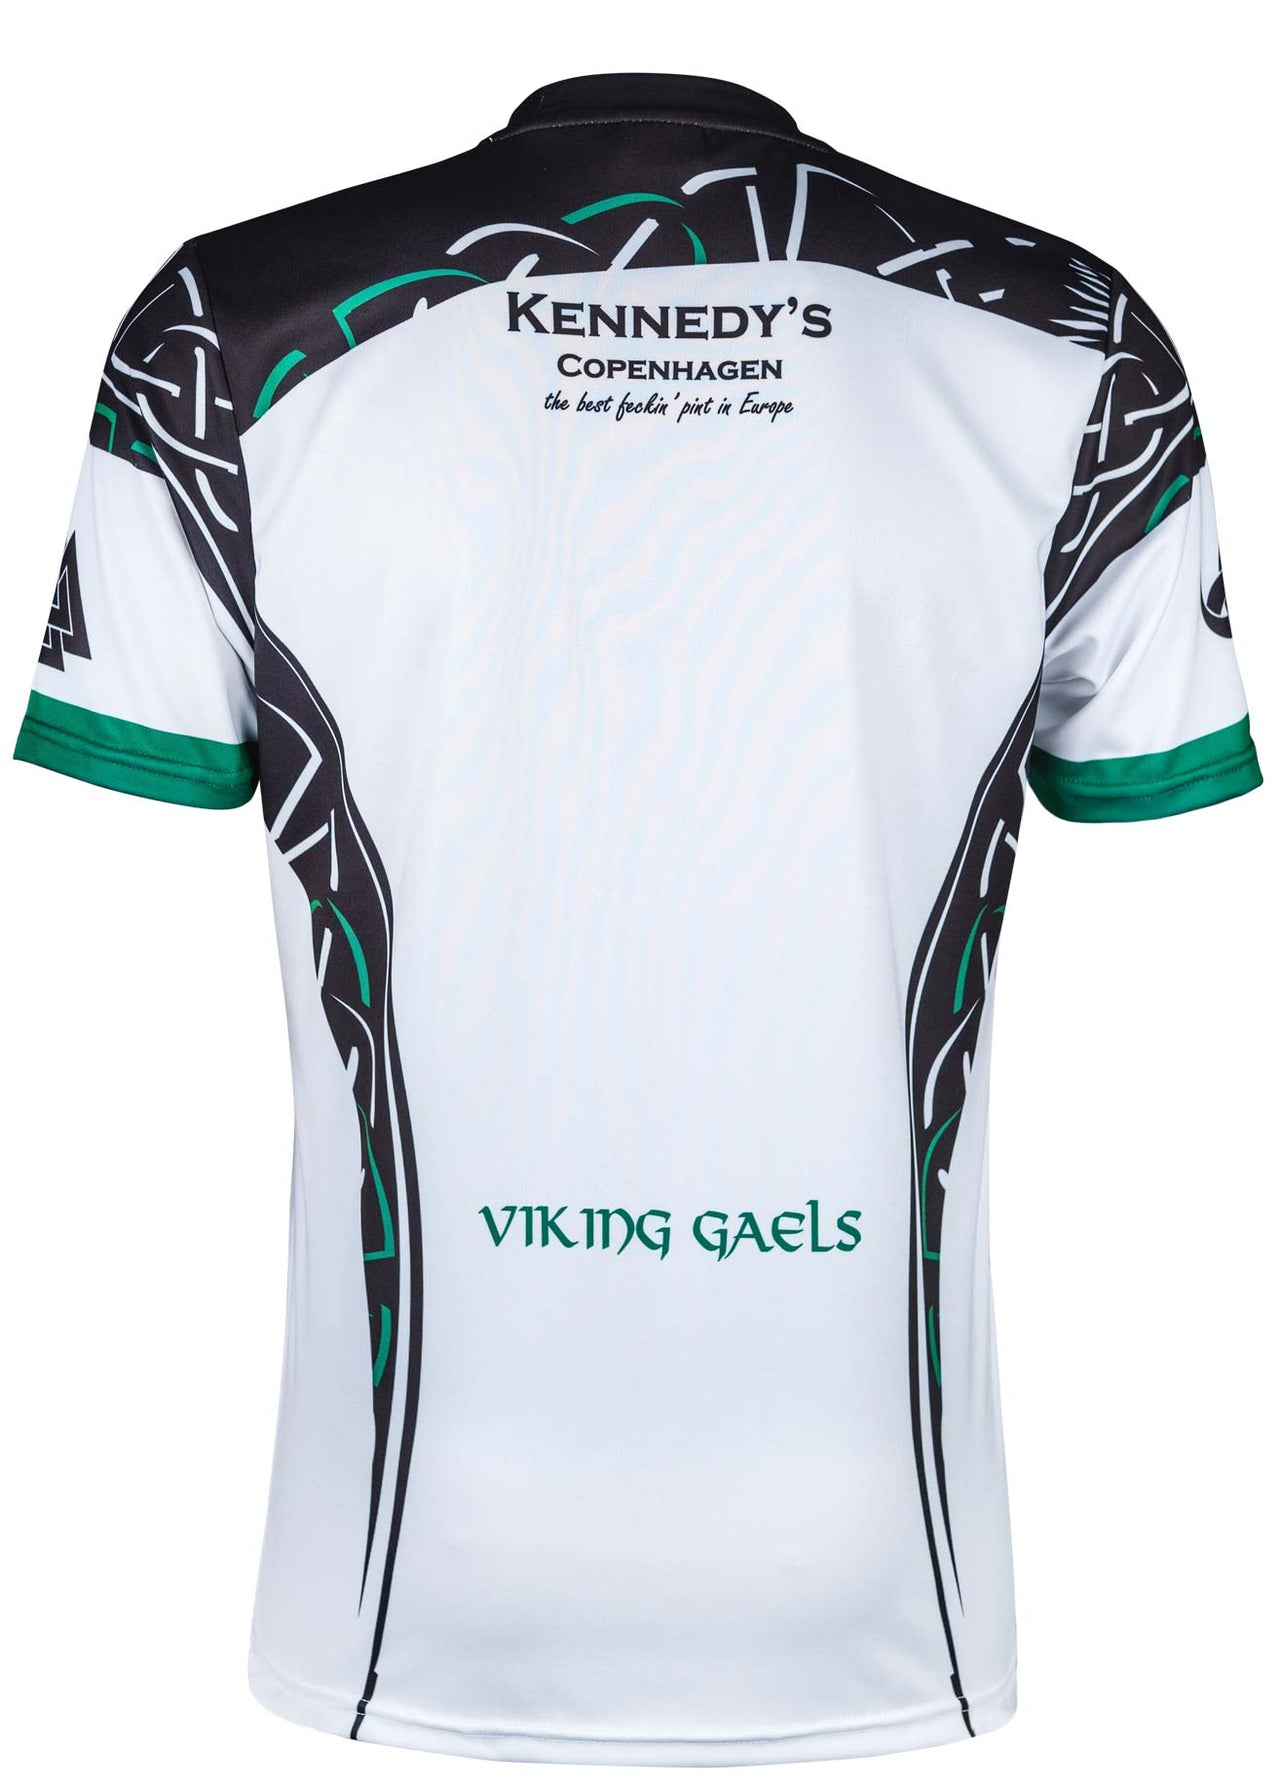 New Viking Gaels Home Jersey Player Fit Adult